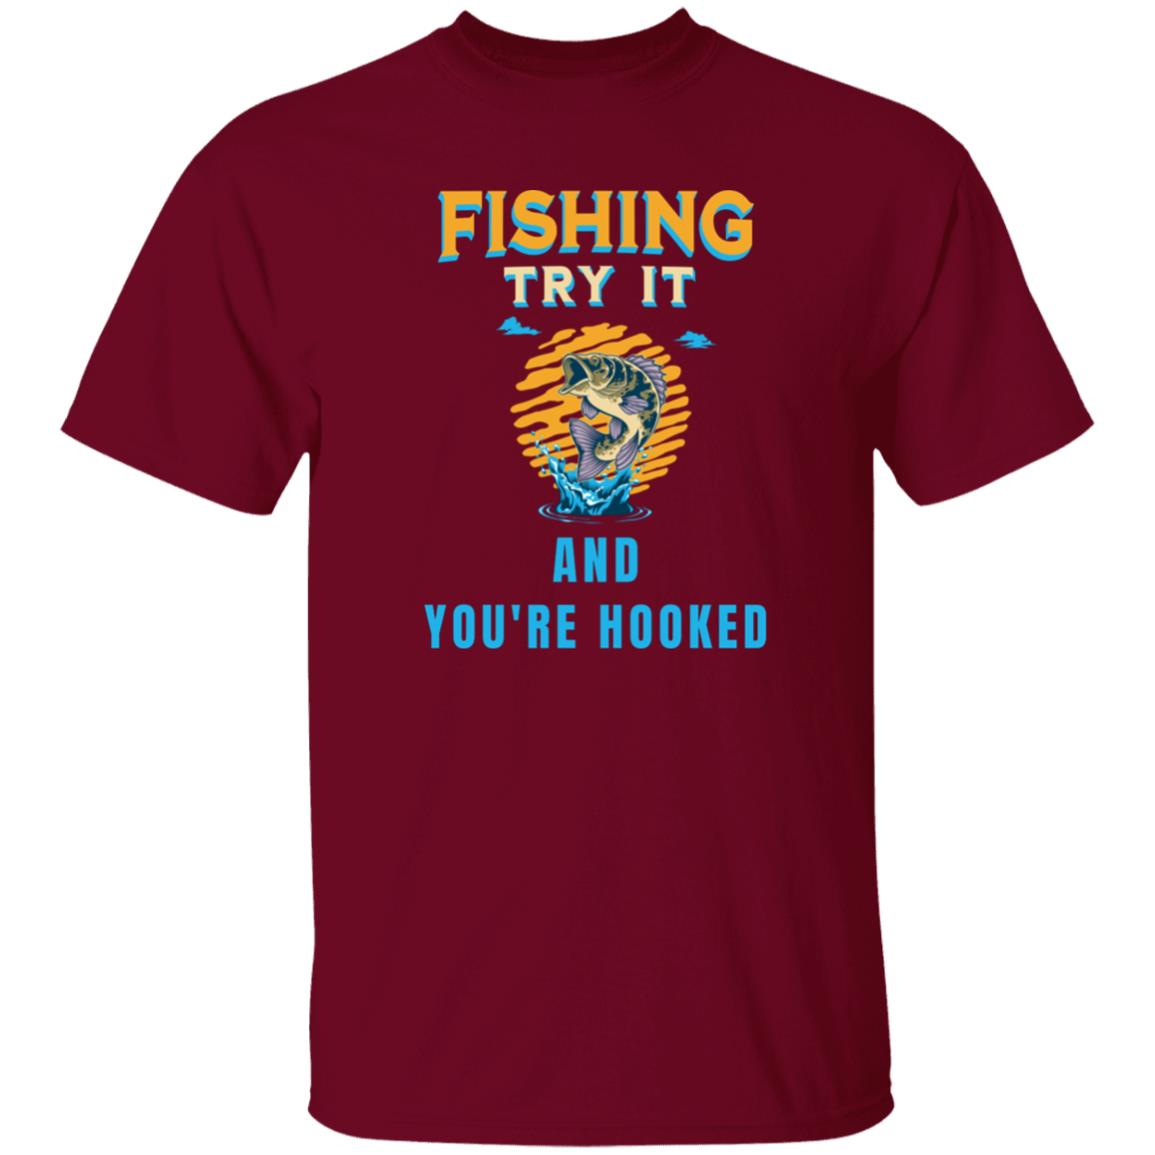 Fishing try it and you're hooked k t-shirt garnet